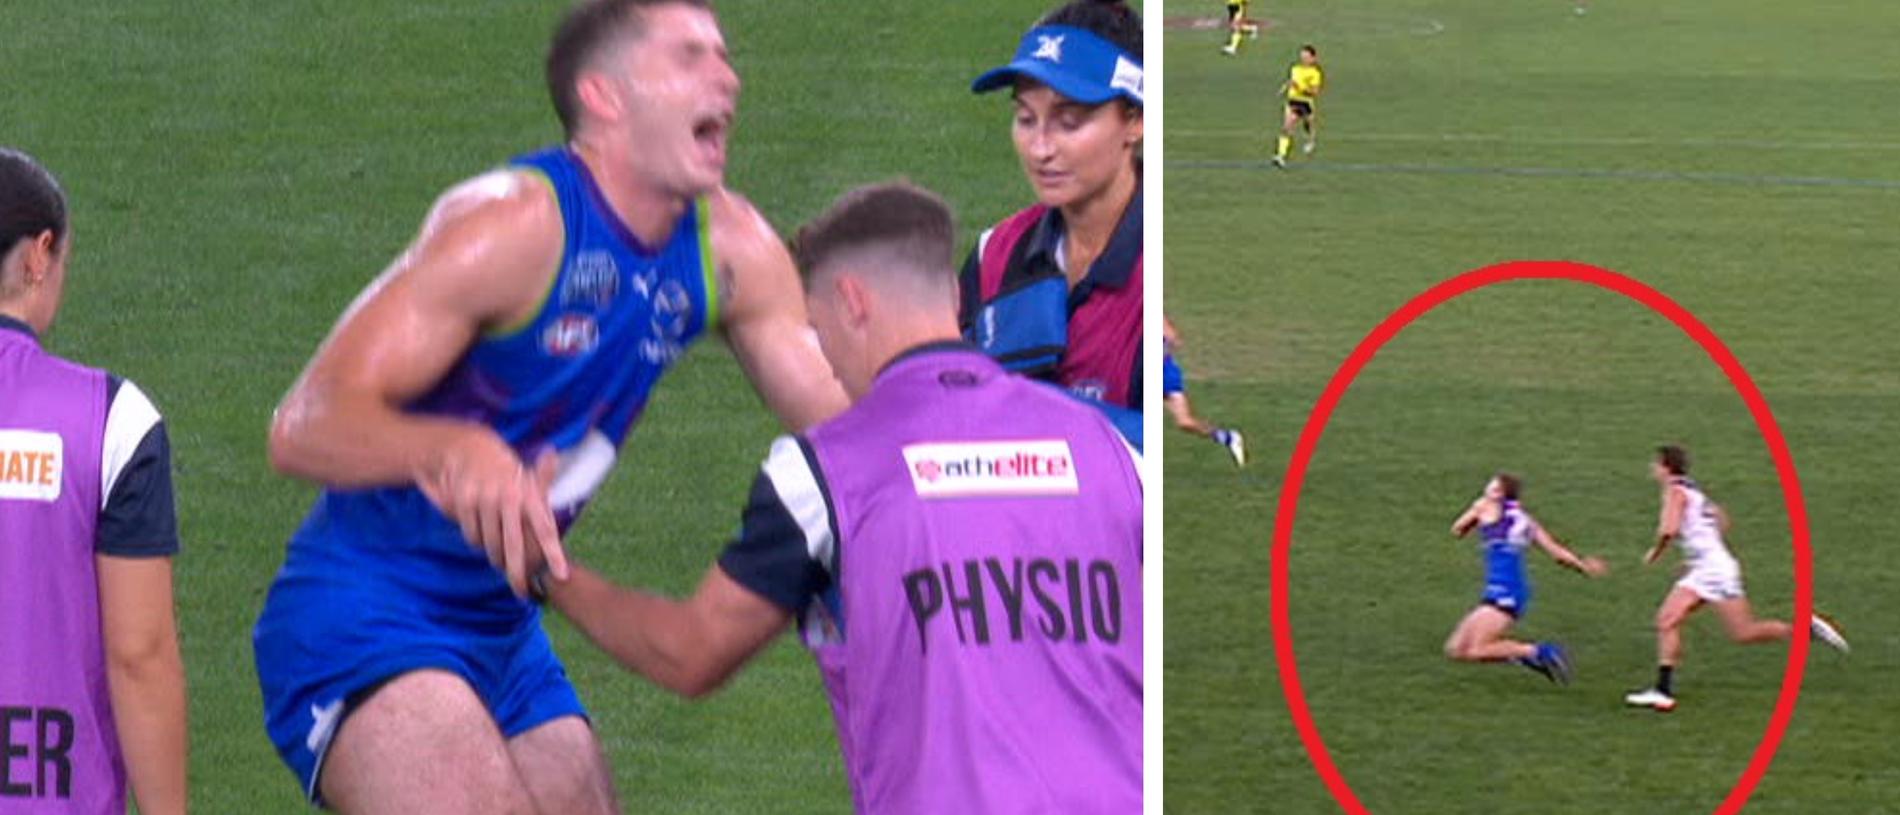 Callum Coleman-Jones suffered a shock injury in the clash with Carlton.